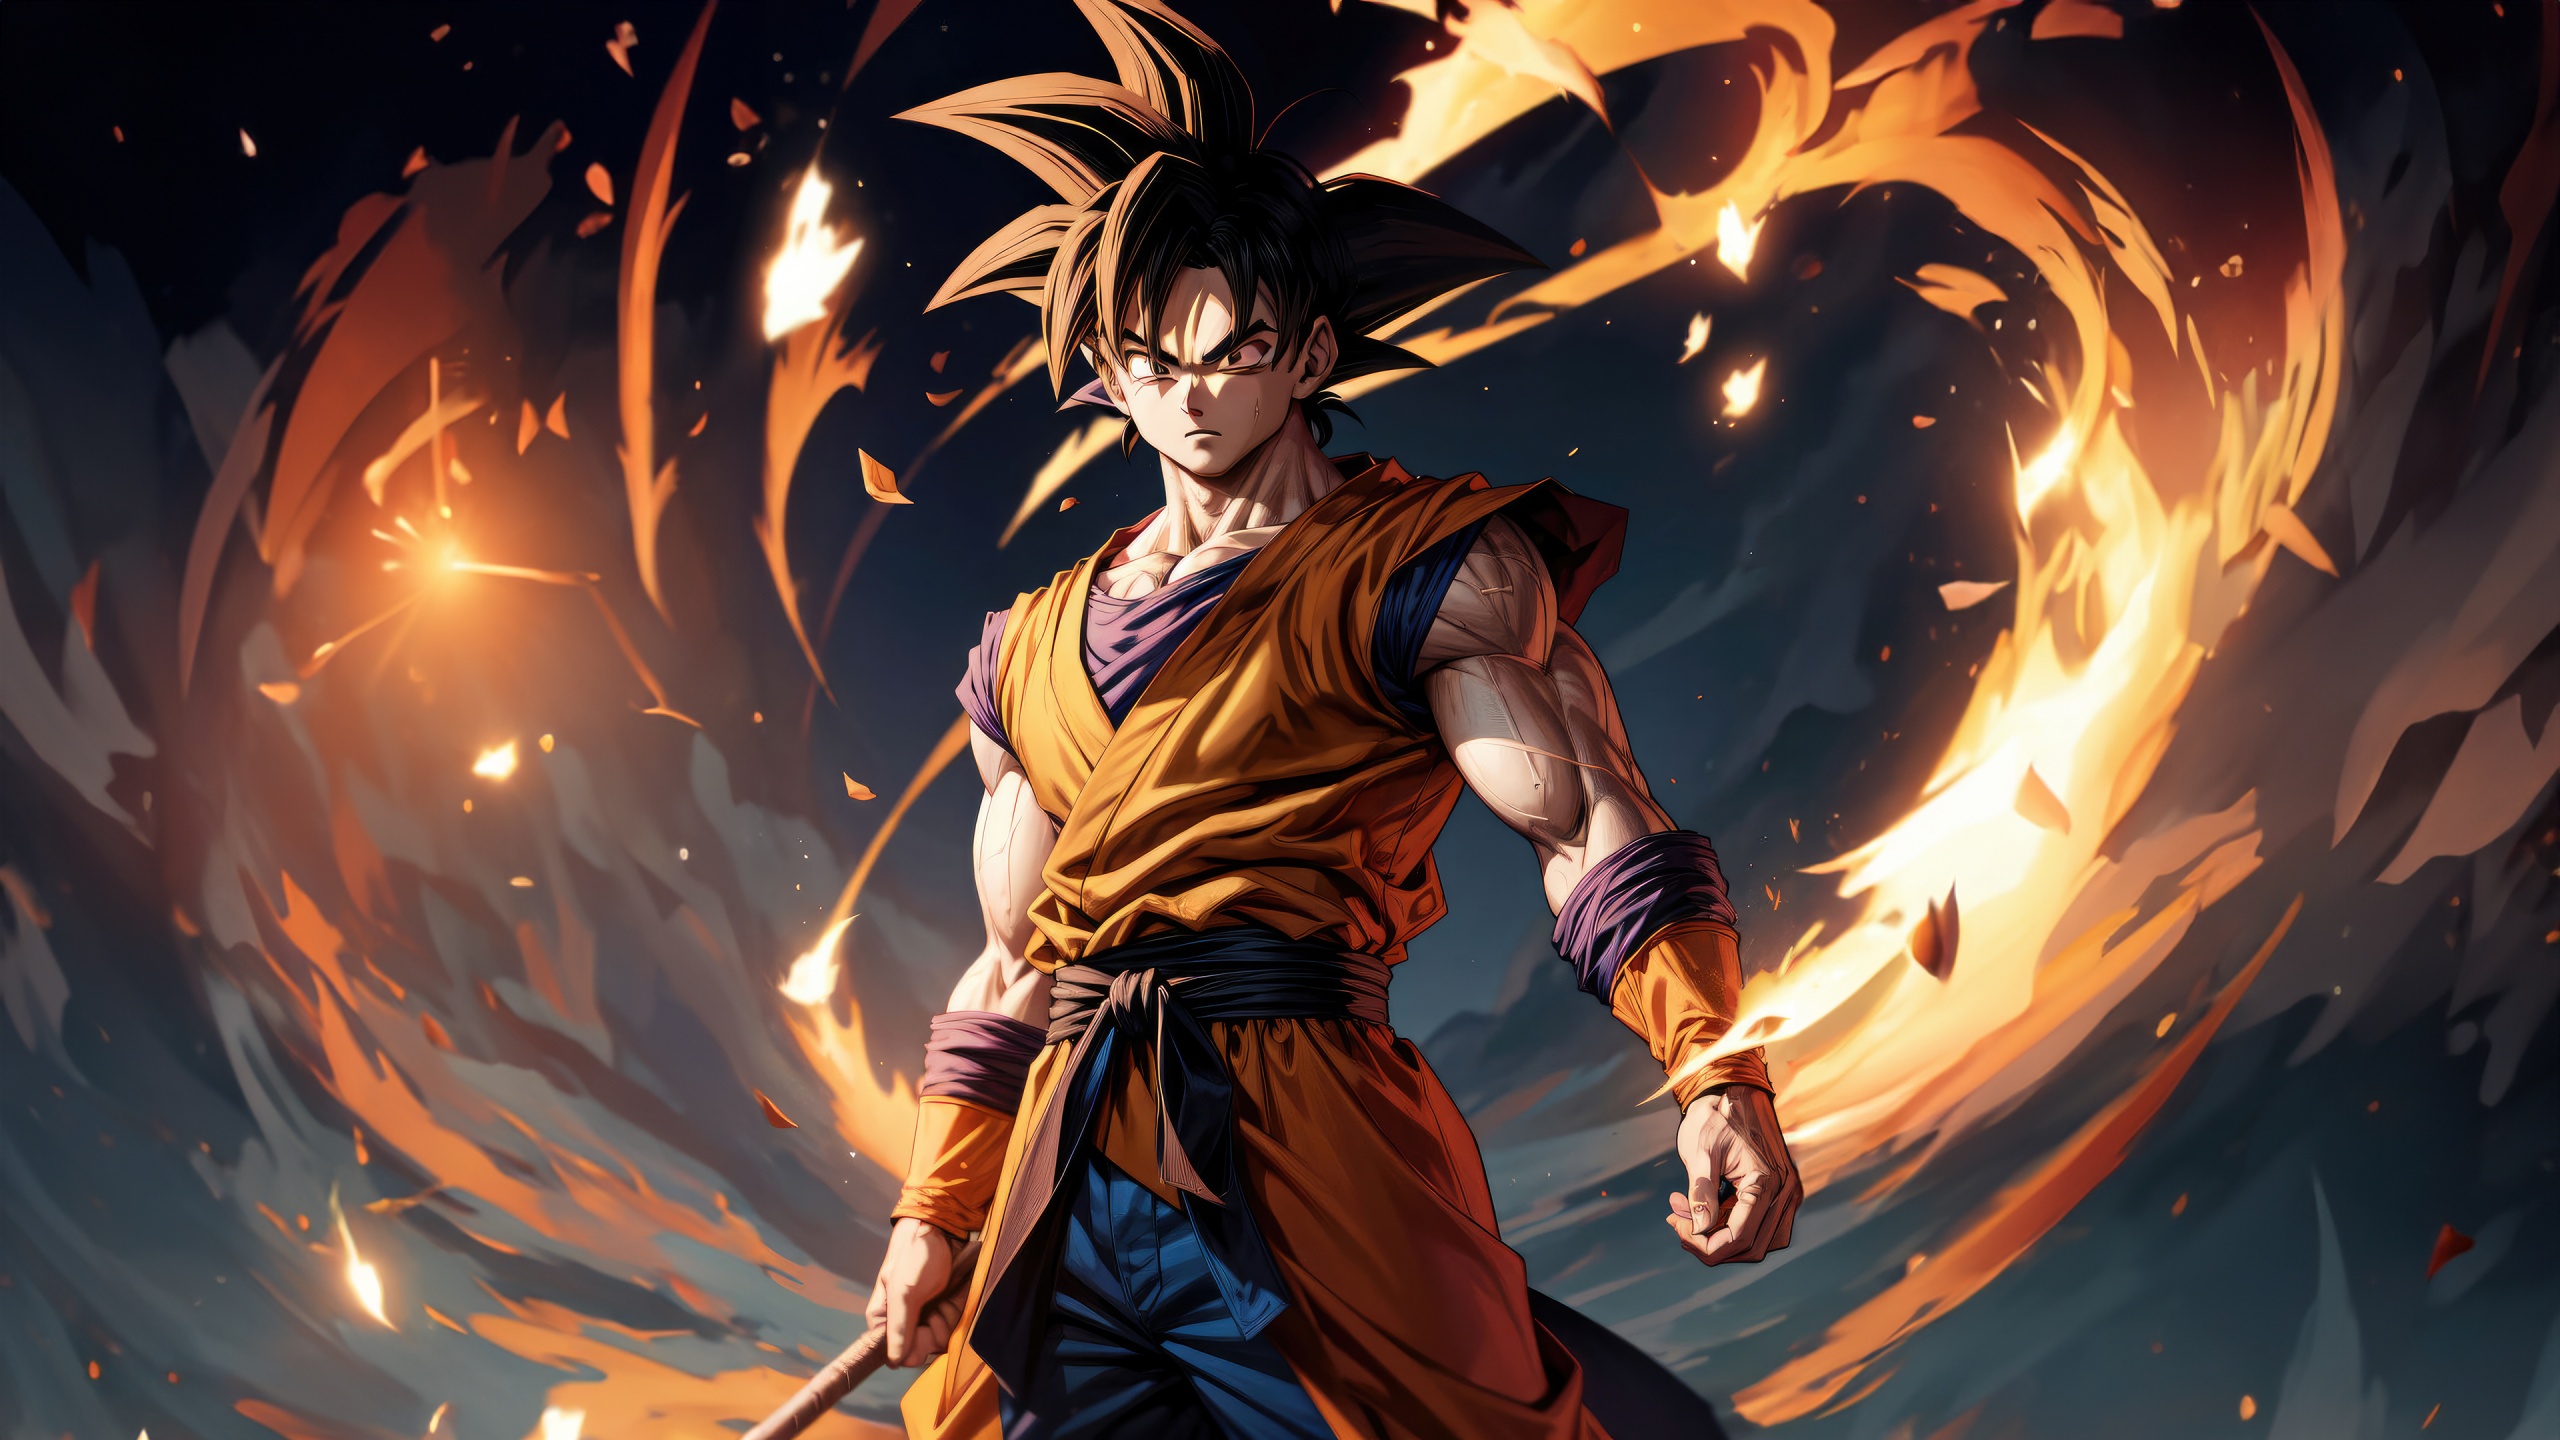 Cool Anime DBZ Wallpapers - Wallpaper Cave